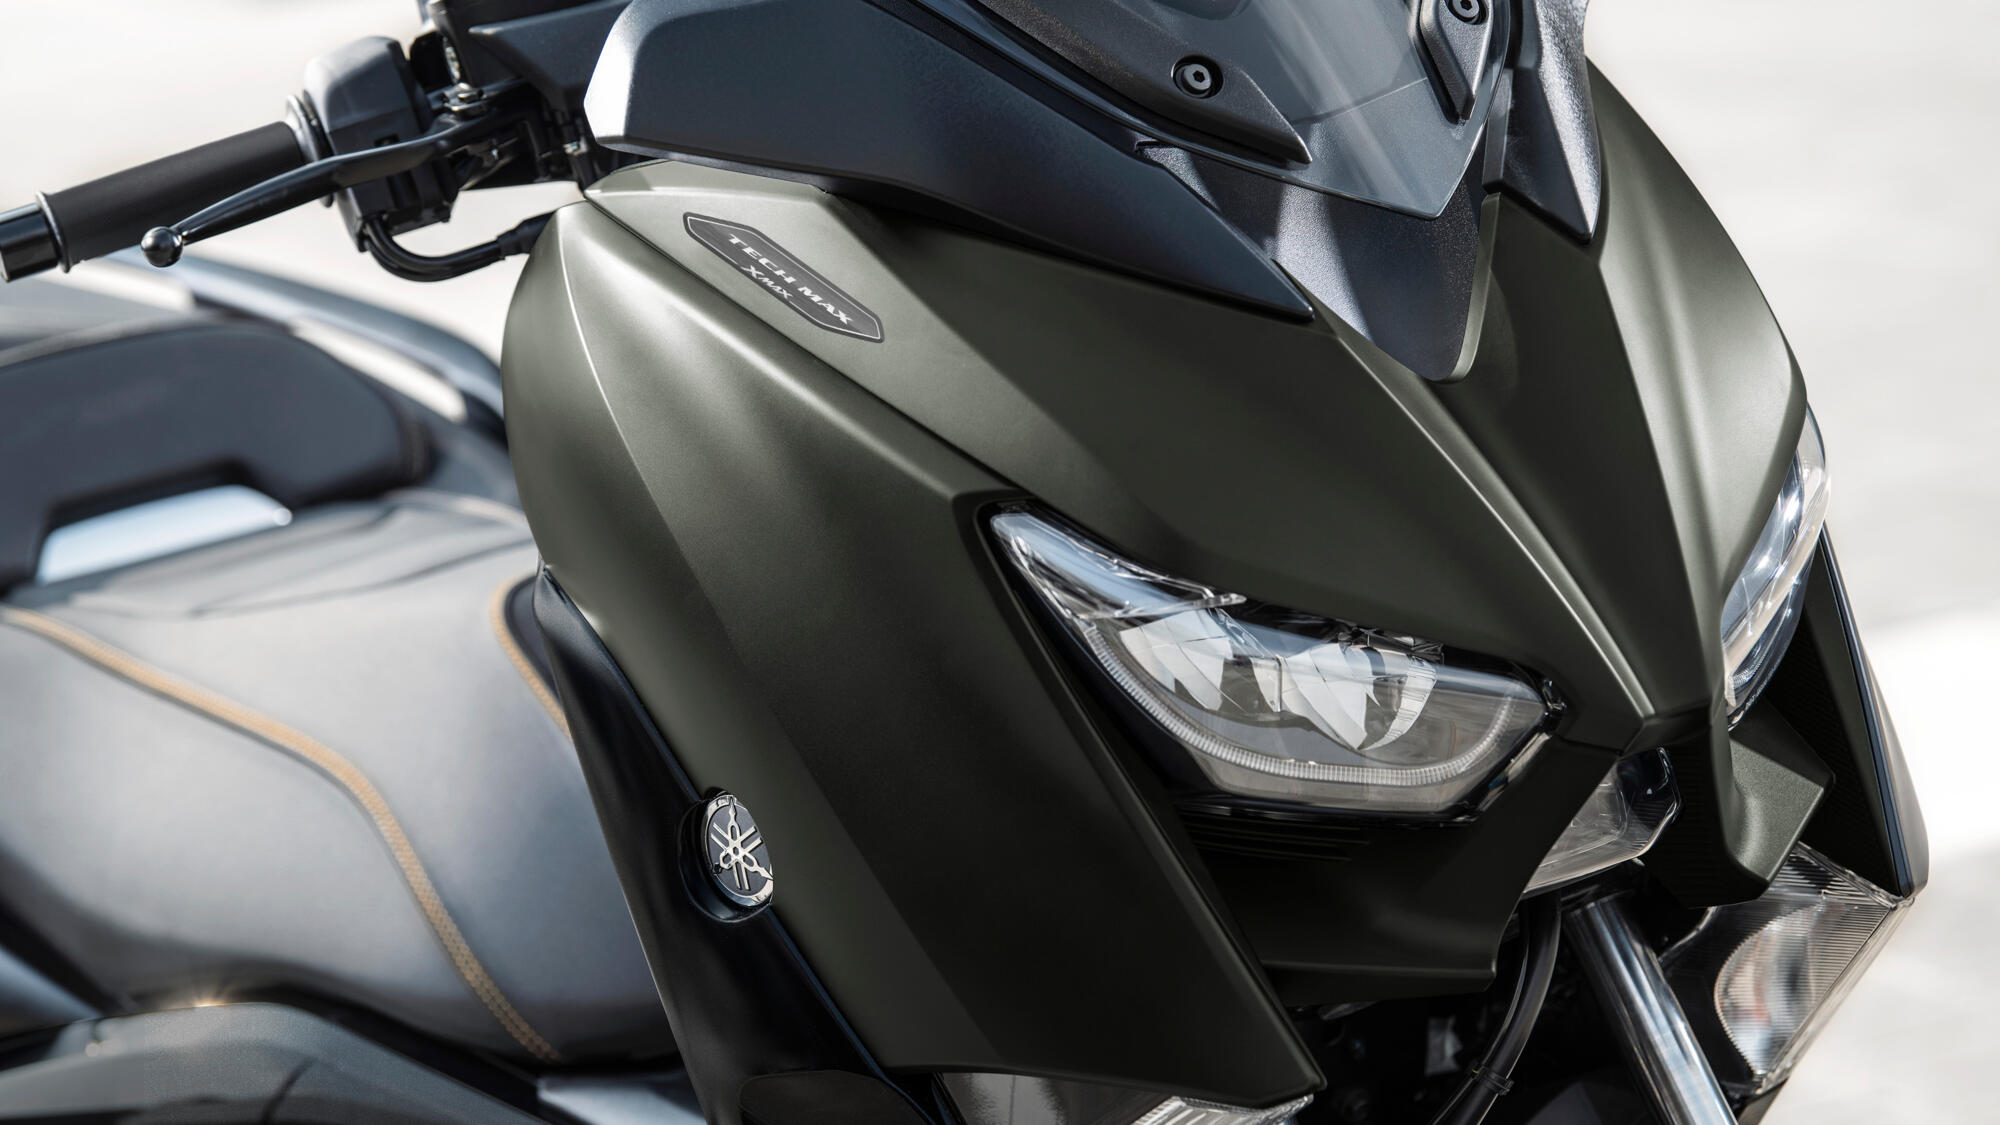 Yamaha XMAX  250  Tech MAX 2020 Features and Technical 